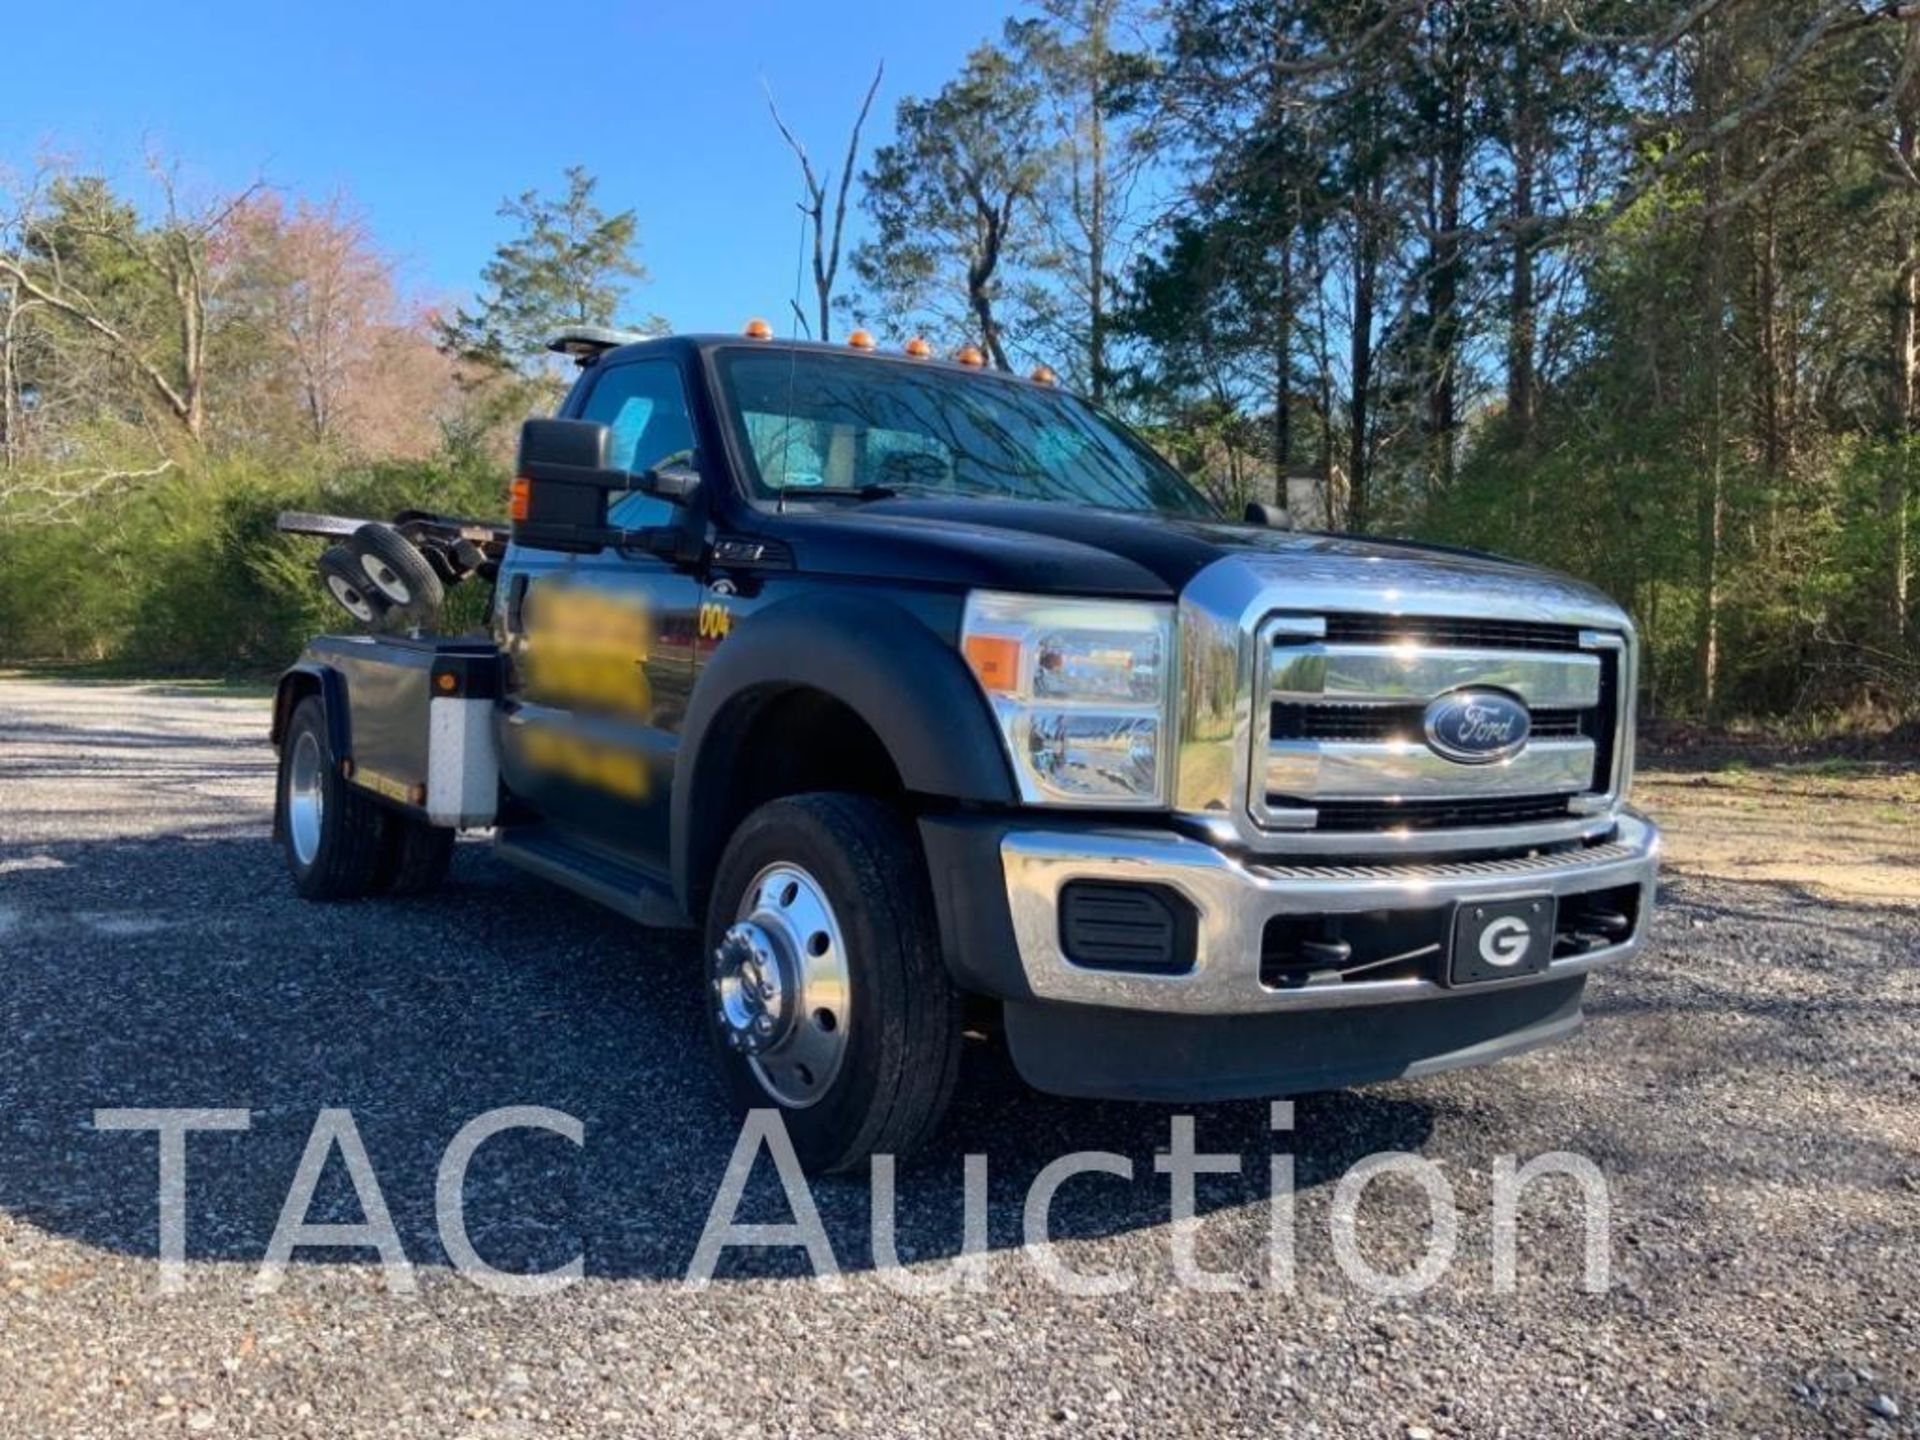 2016 Ford F-450 Super Duty Wrecker - Image 7 of 49